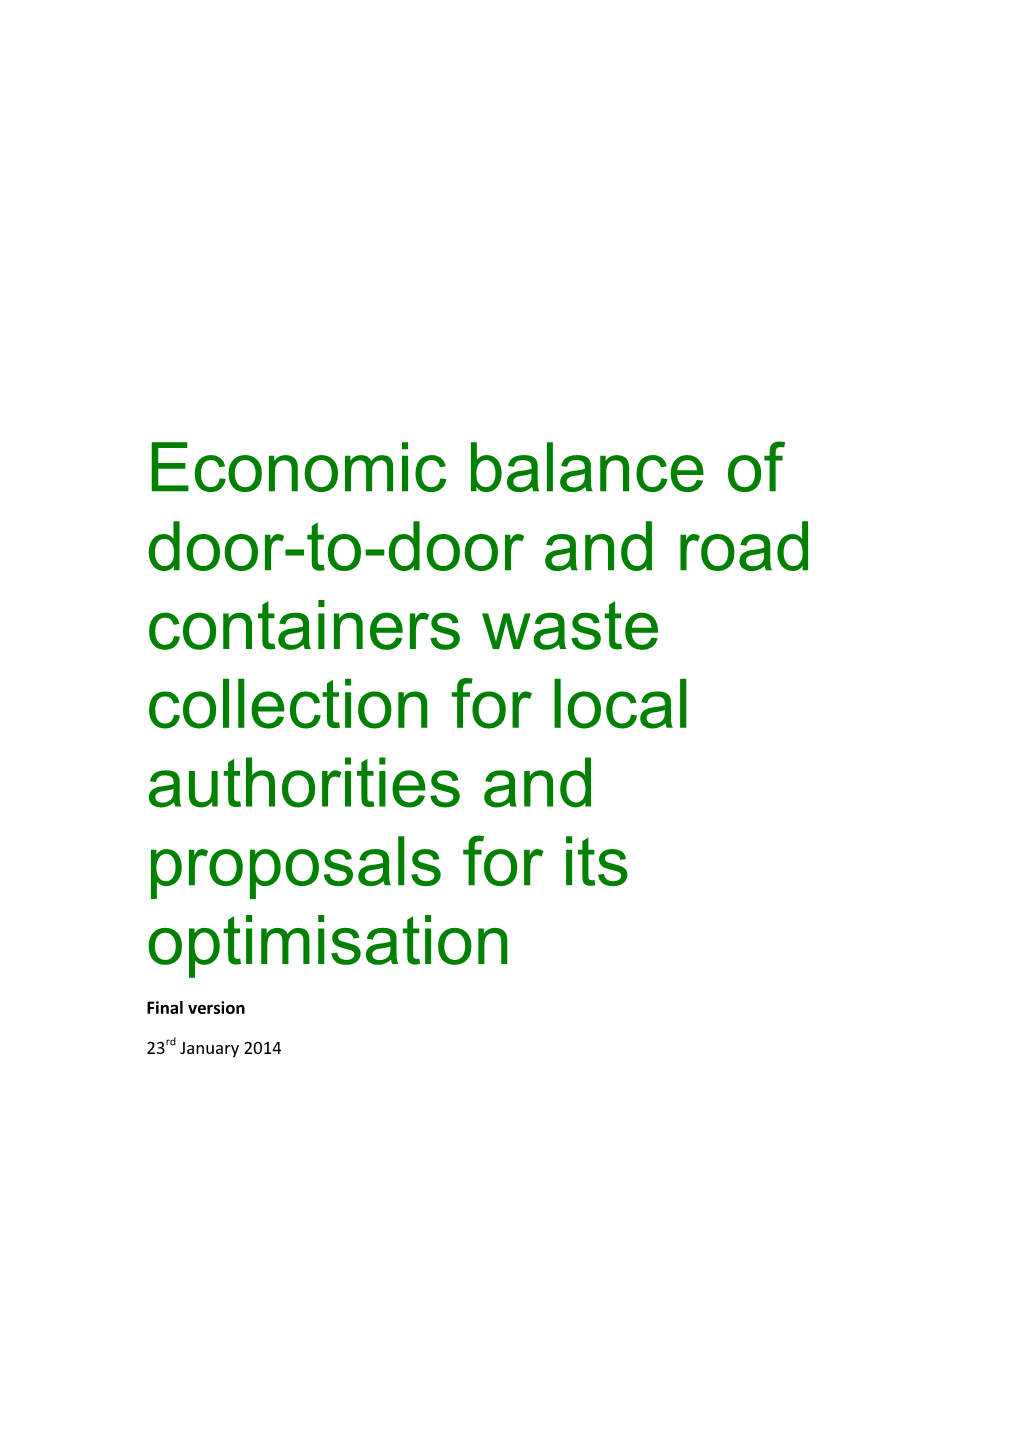 Economic Balance of Door-To-Door and Road Containers Waste Collection for Local Authorities and Proposals for Its Optimisation